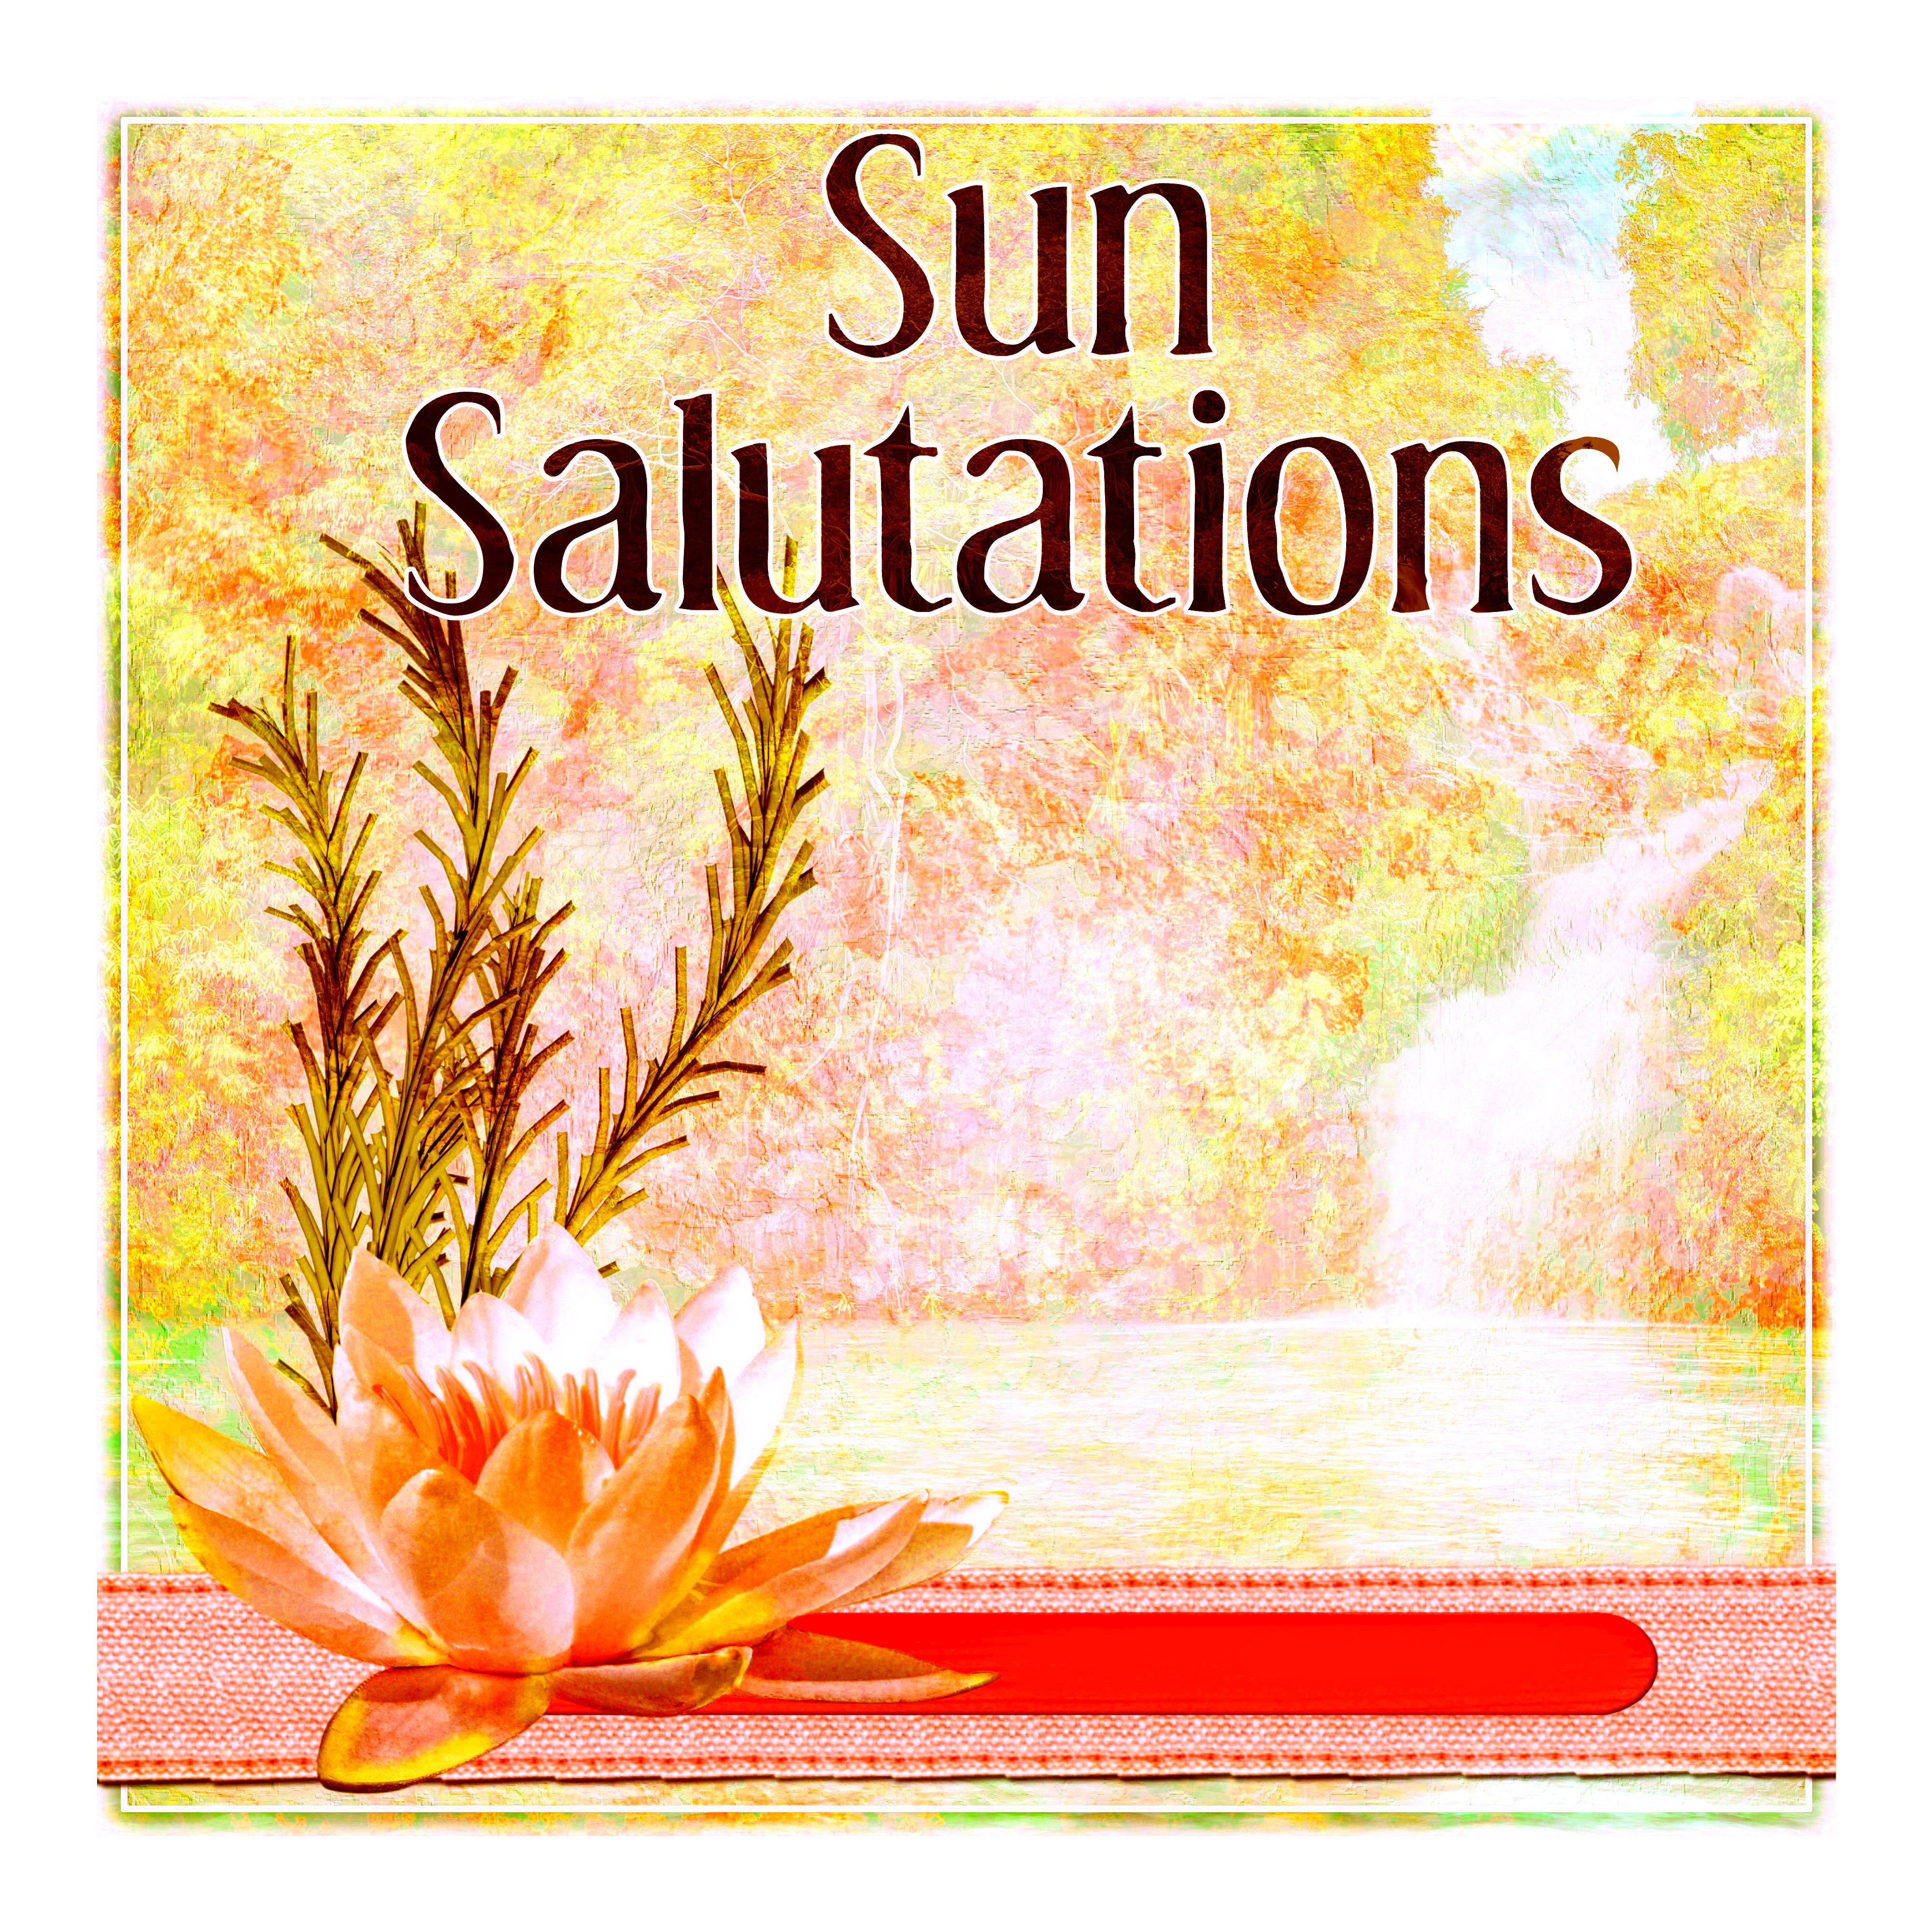 Sun Salutations - Wellness & Spa Selection, Soft Music for Sensual Massage, New Age, Soothing Music, Harmony of Senses, Calm Music for Ralaxation, Deep Nature Sounds